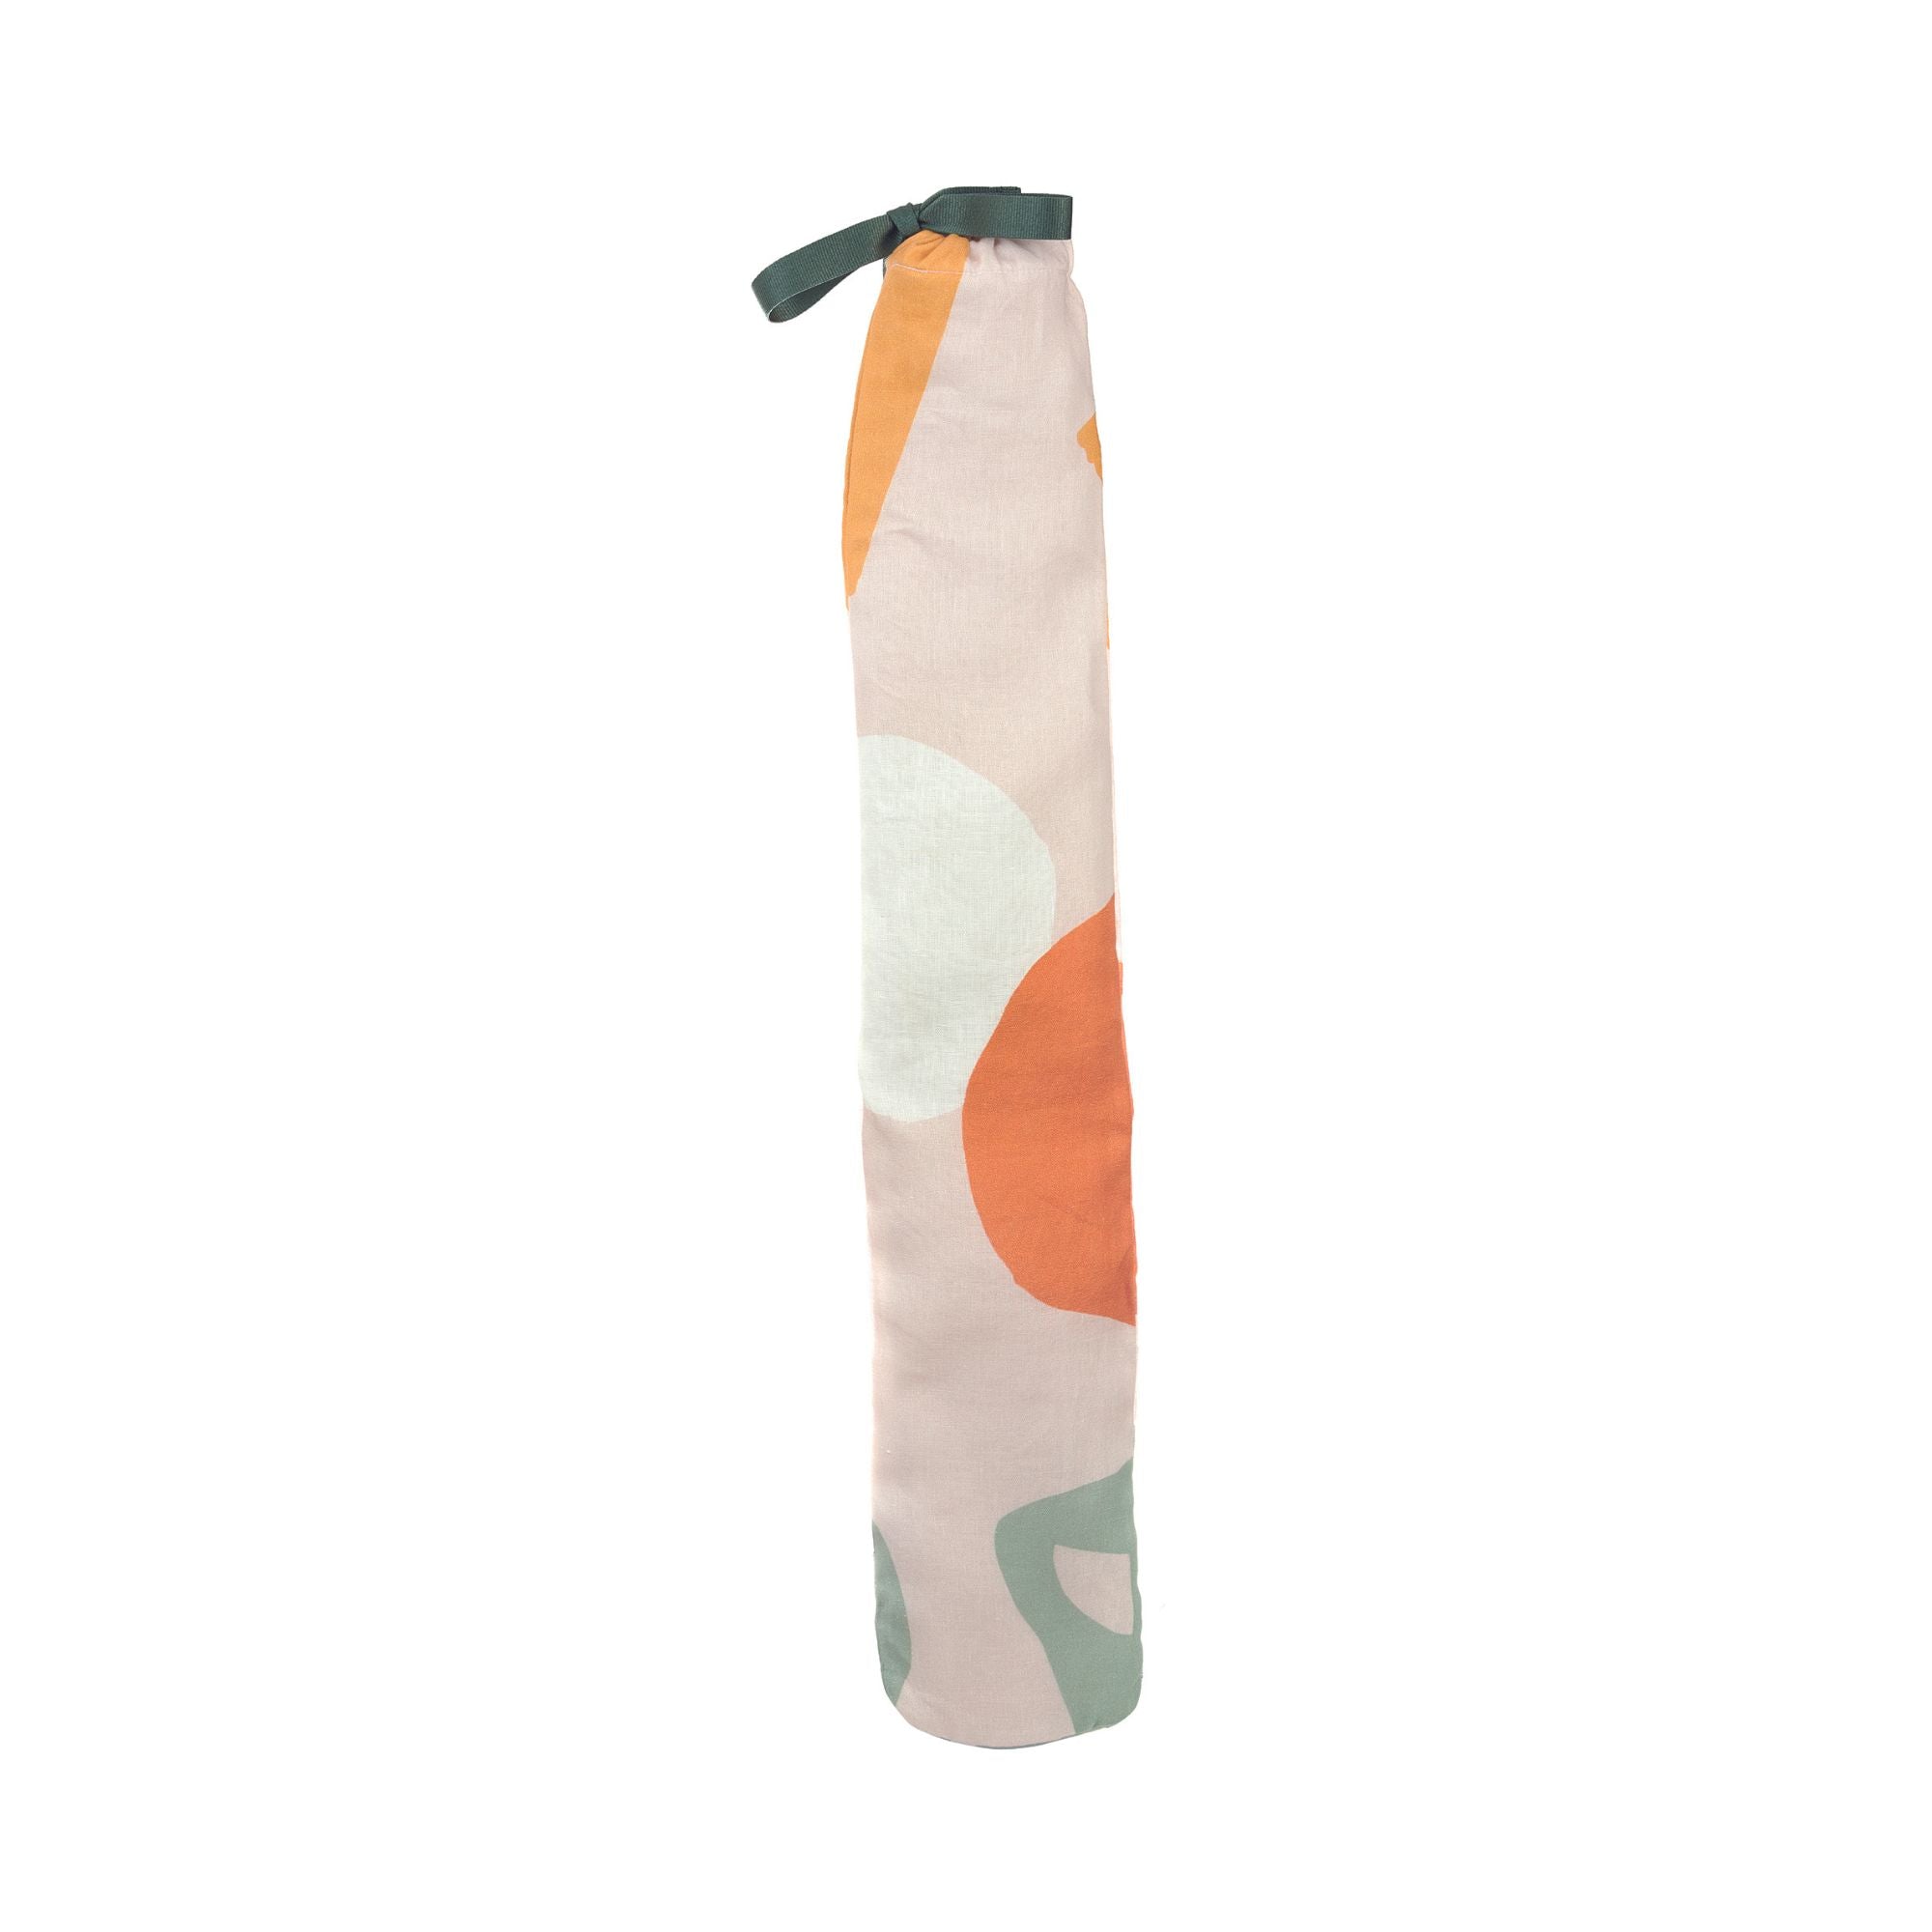 2 Litre Long Hot Water Bottle with 100% Linen Abstract Cover